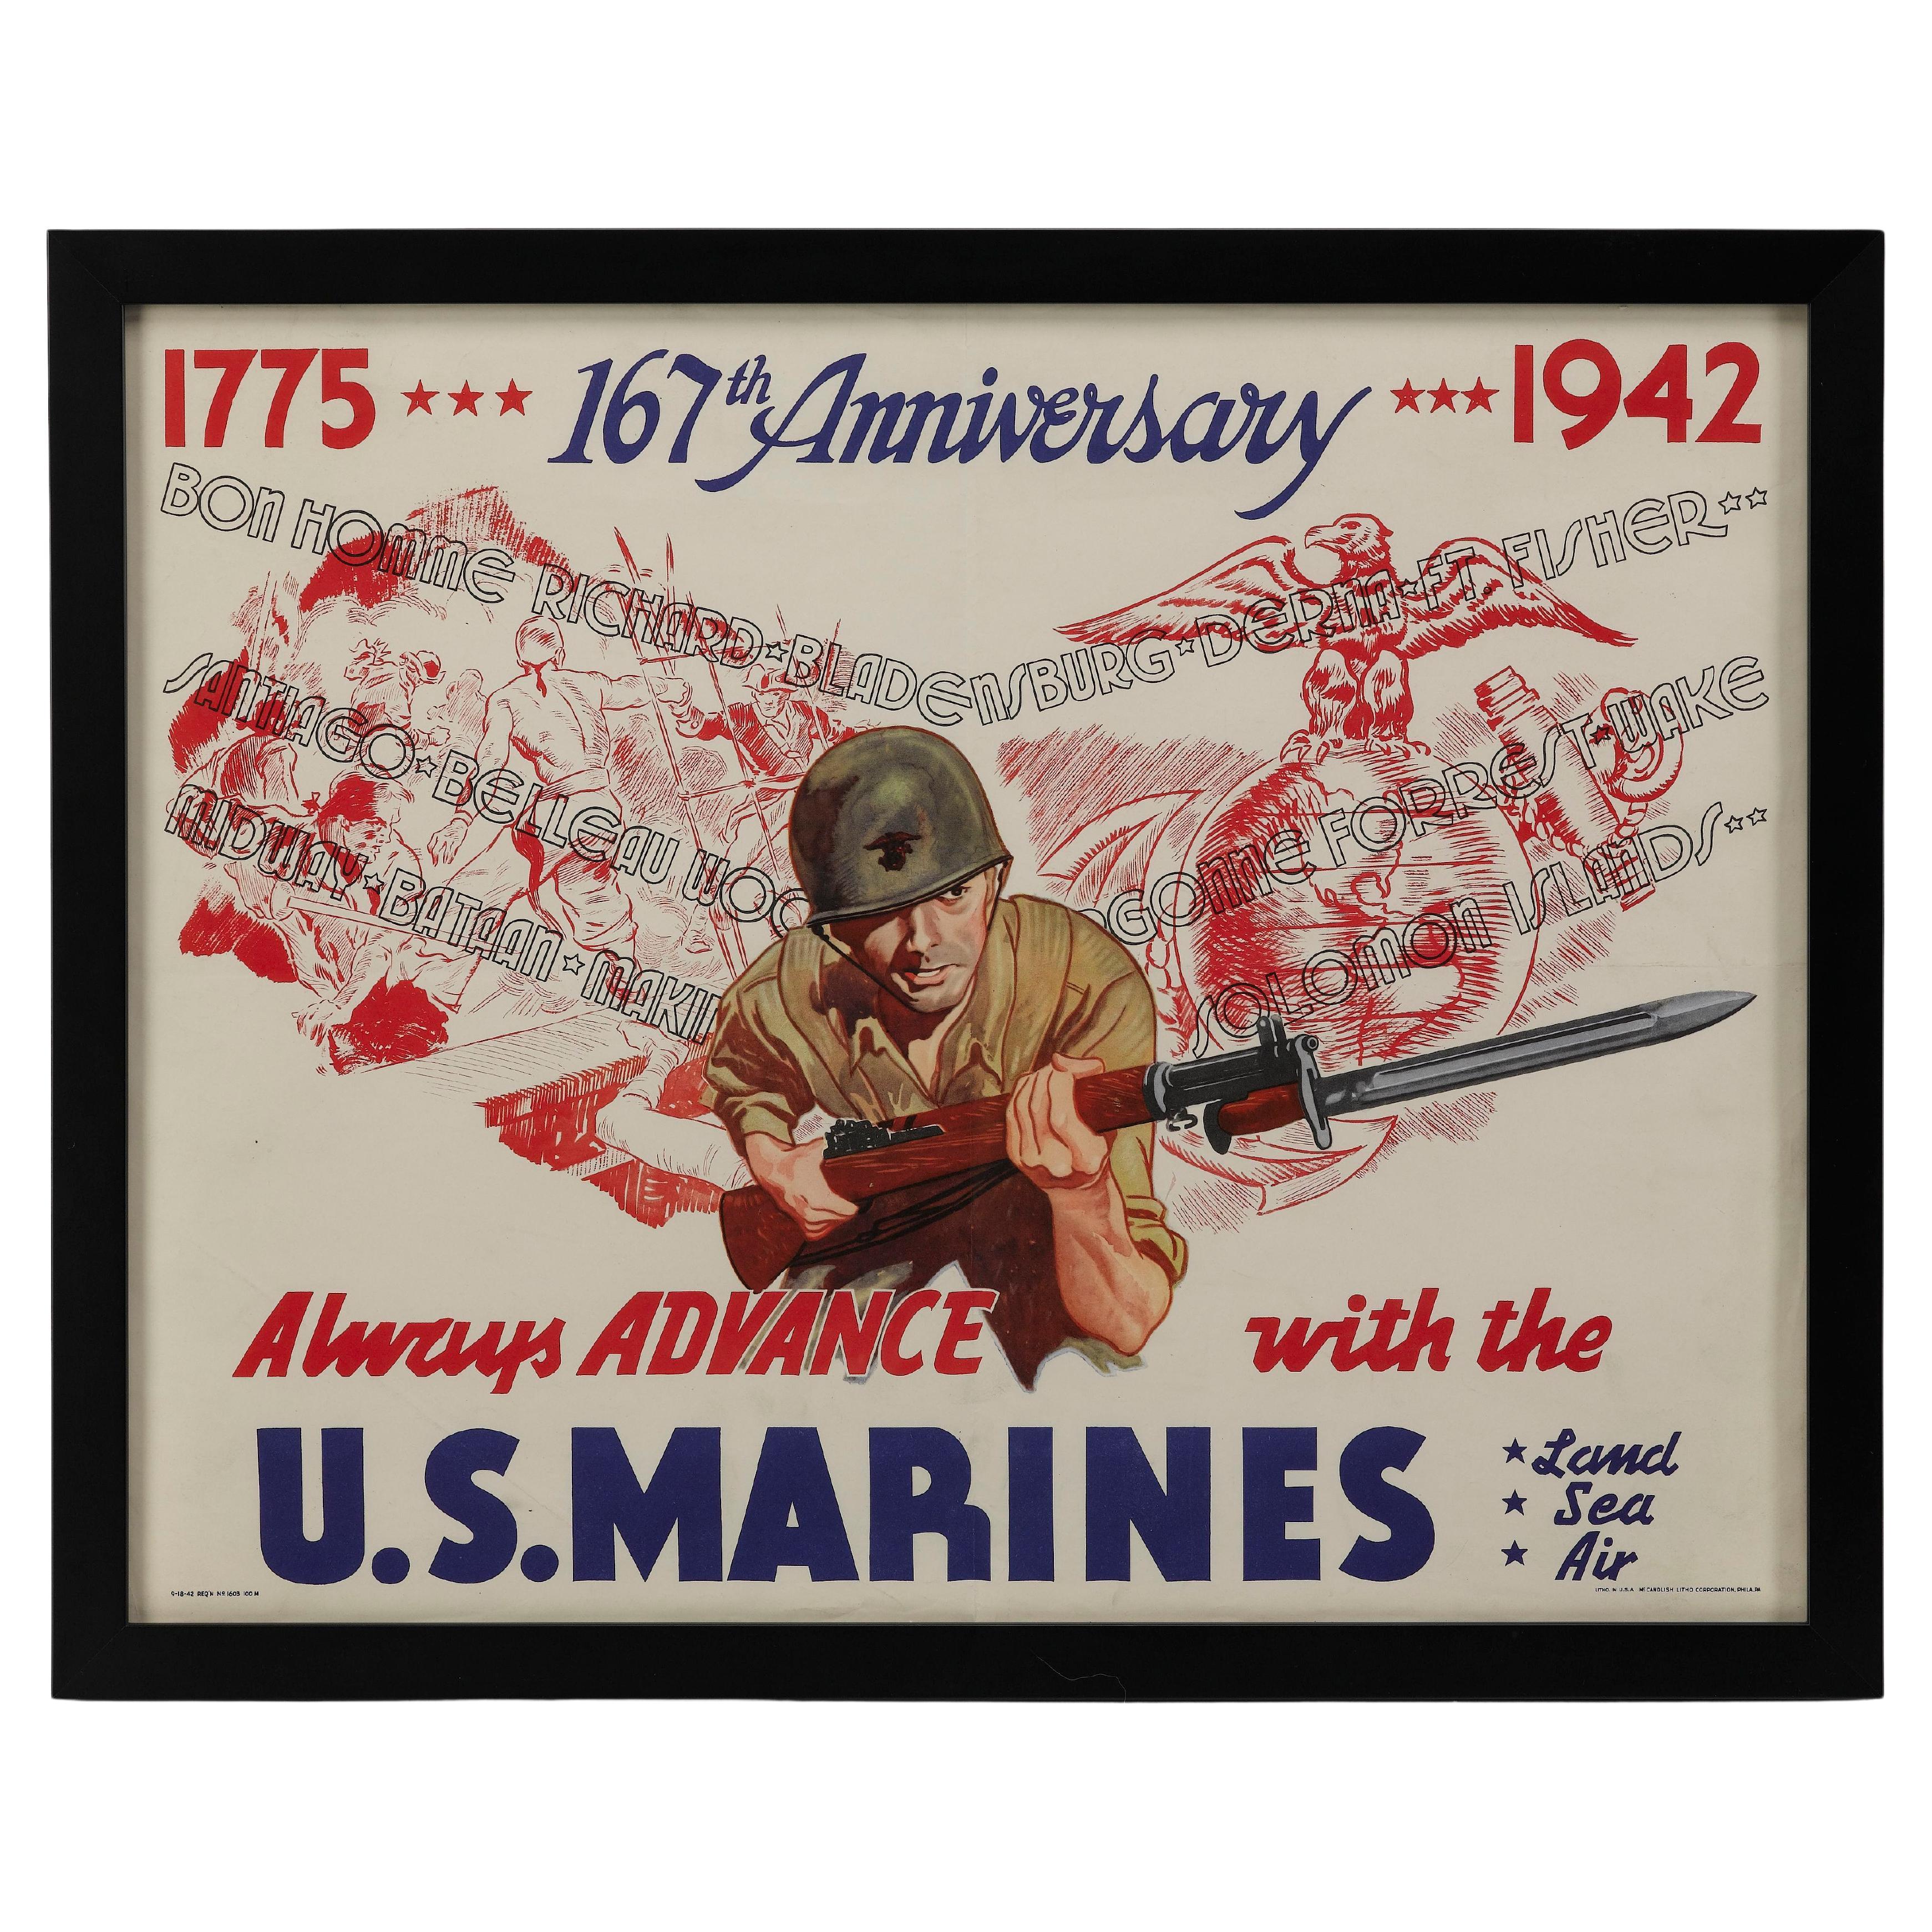 "1775- 167th Anniversary - 1942. Always Advance with the U.S. Marines" Poster  For Sale